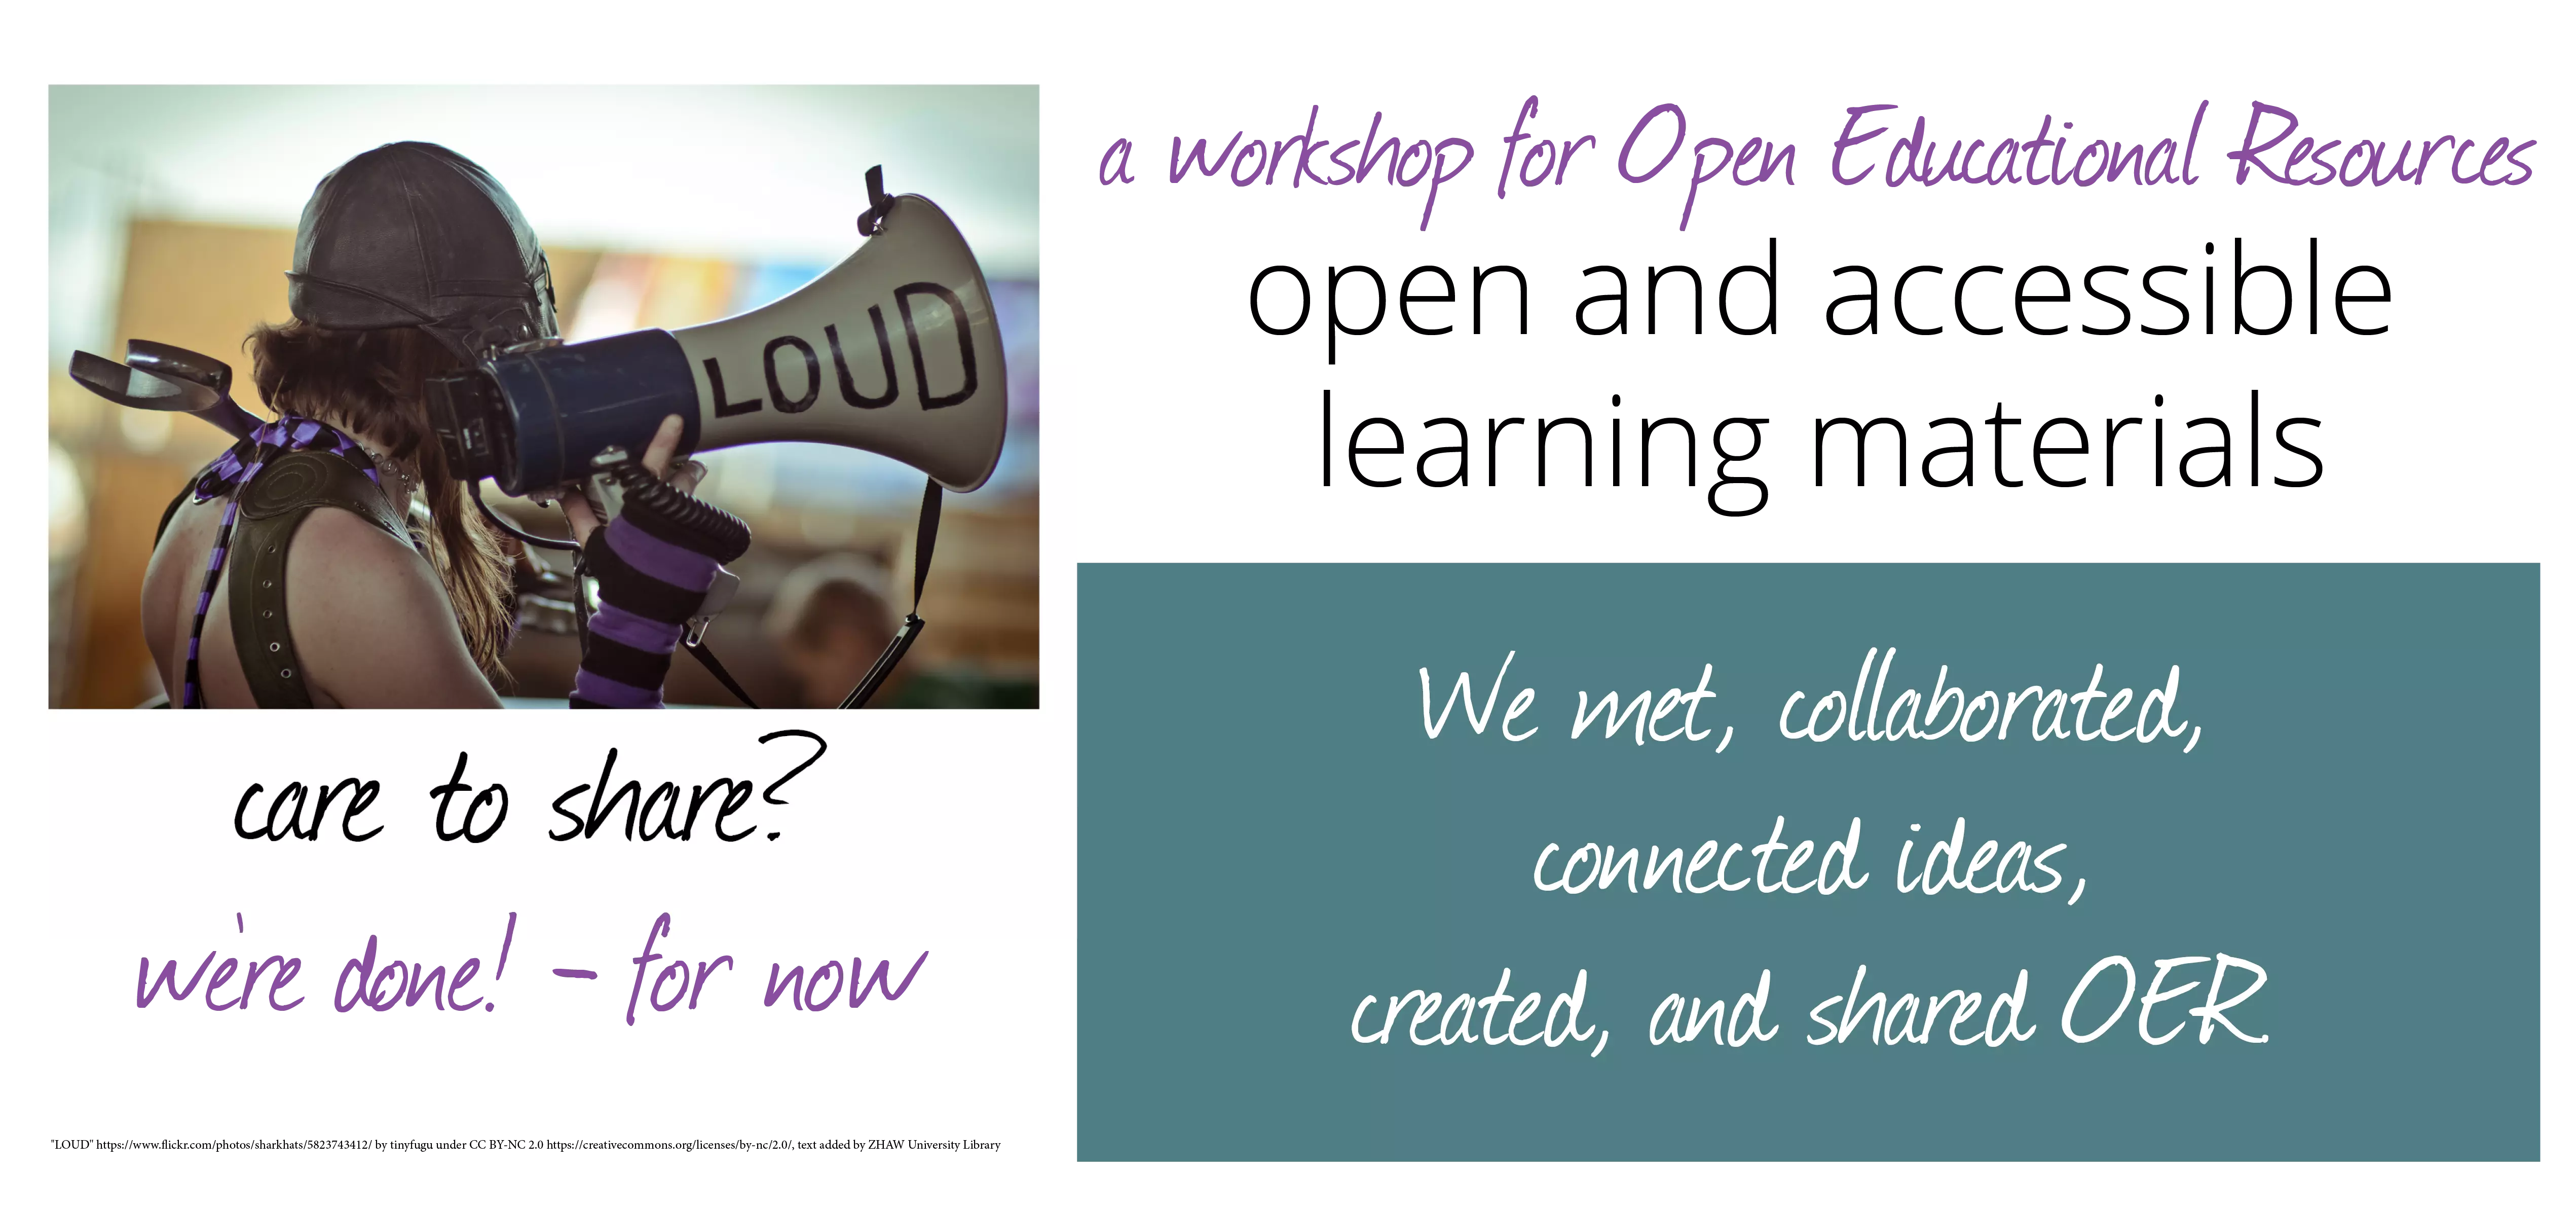 OER Creator Workshop, care to share image